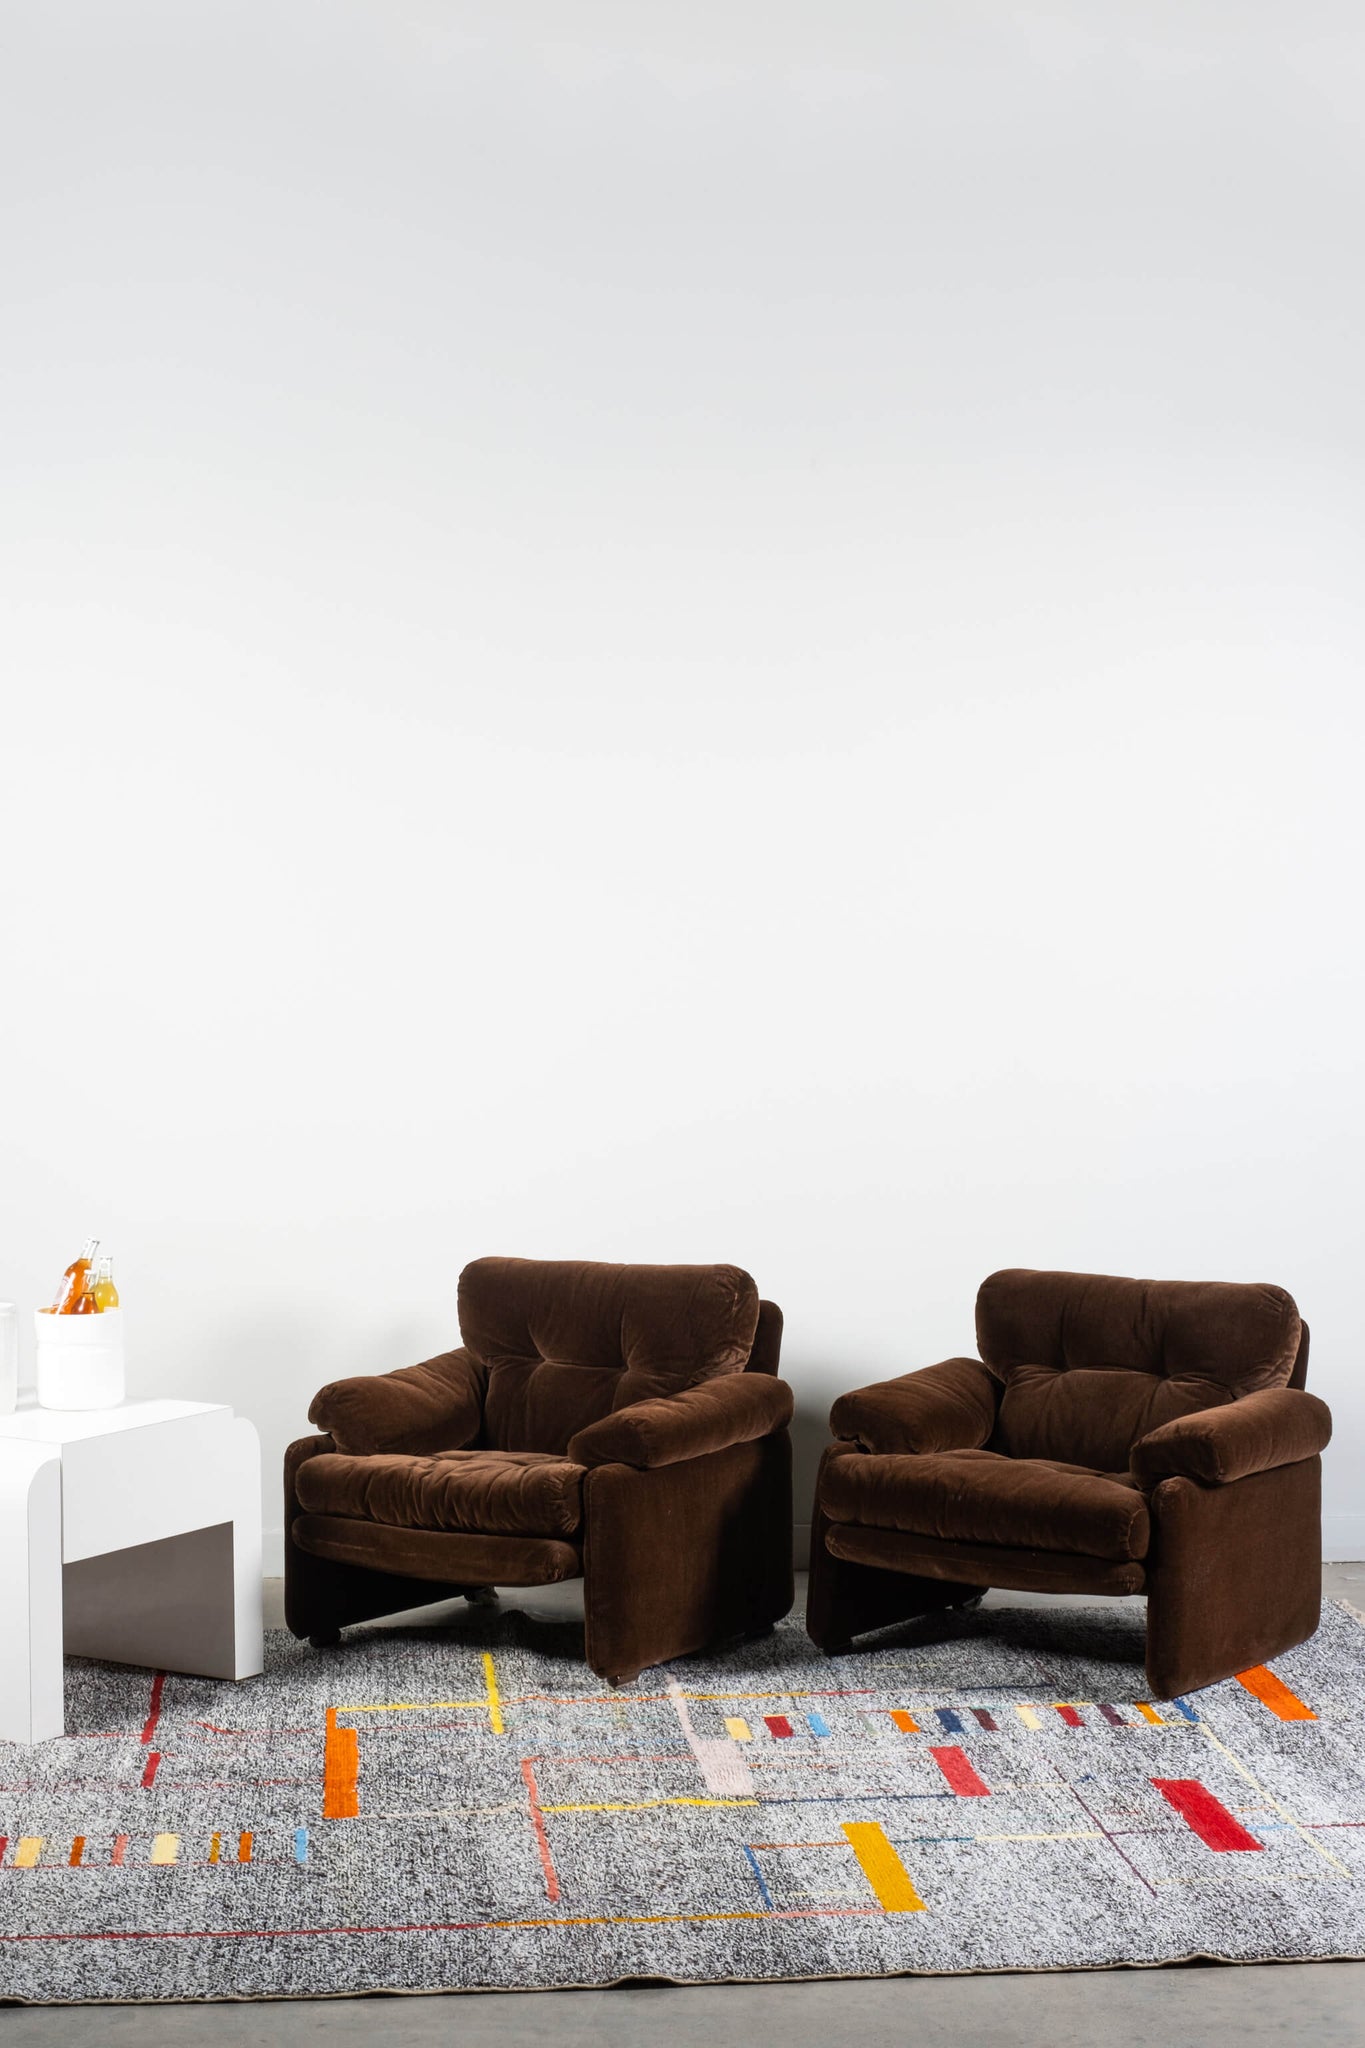 Pair Vintage Coronado Armchairs in Orginal Brown Velvet C&B Italia Afra Tobia Scarpa, shown side by side on a rug with a side table